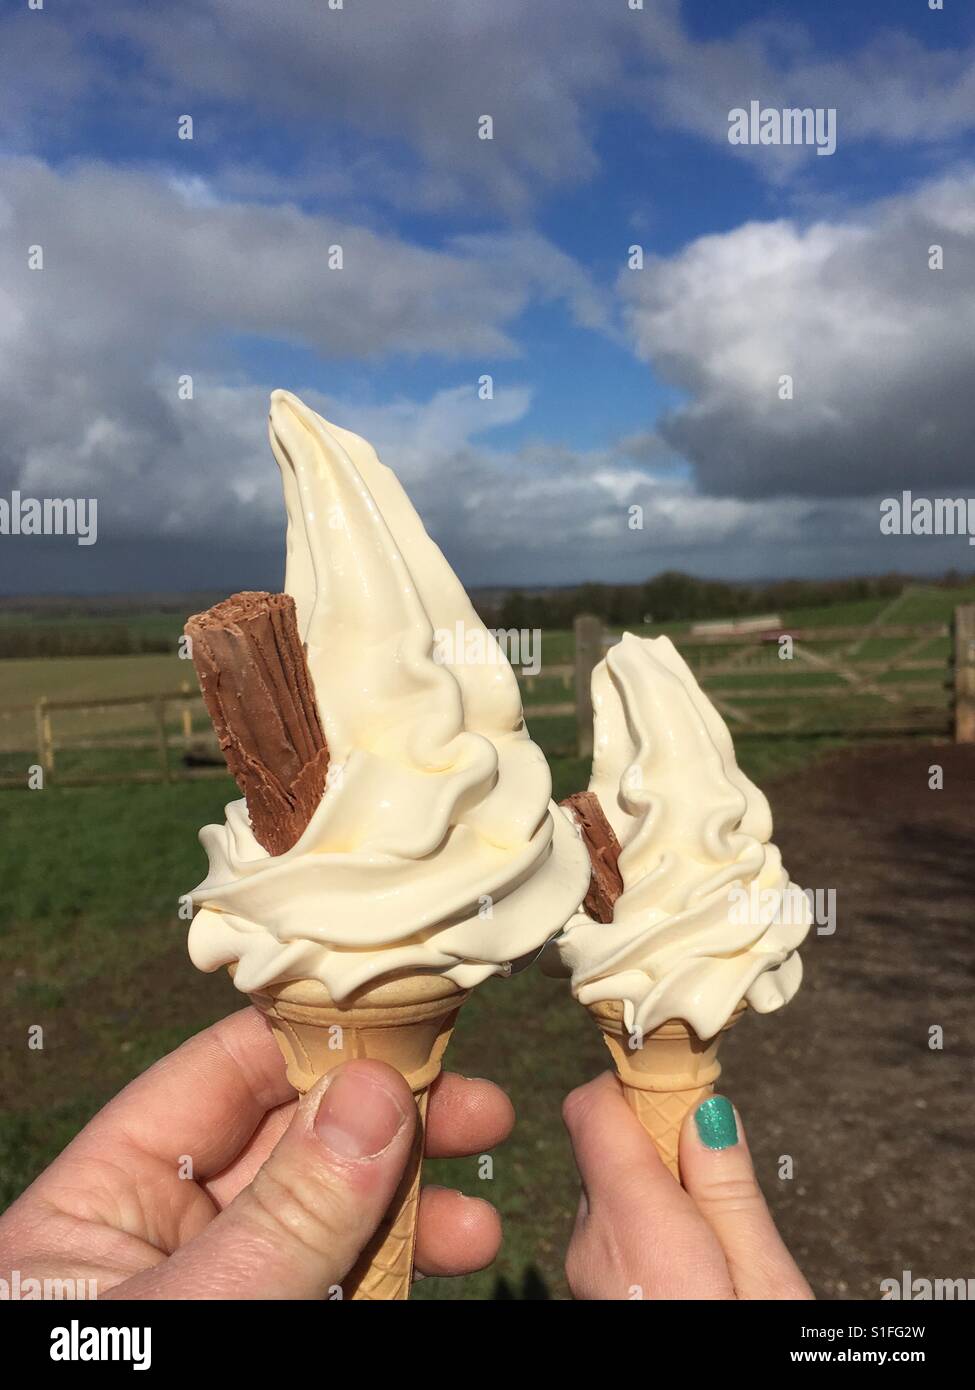 His and hers ice creams Stock Photo